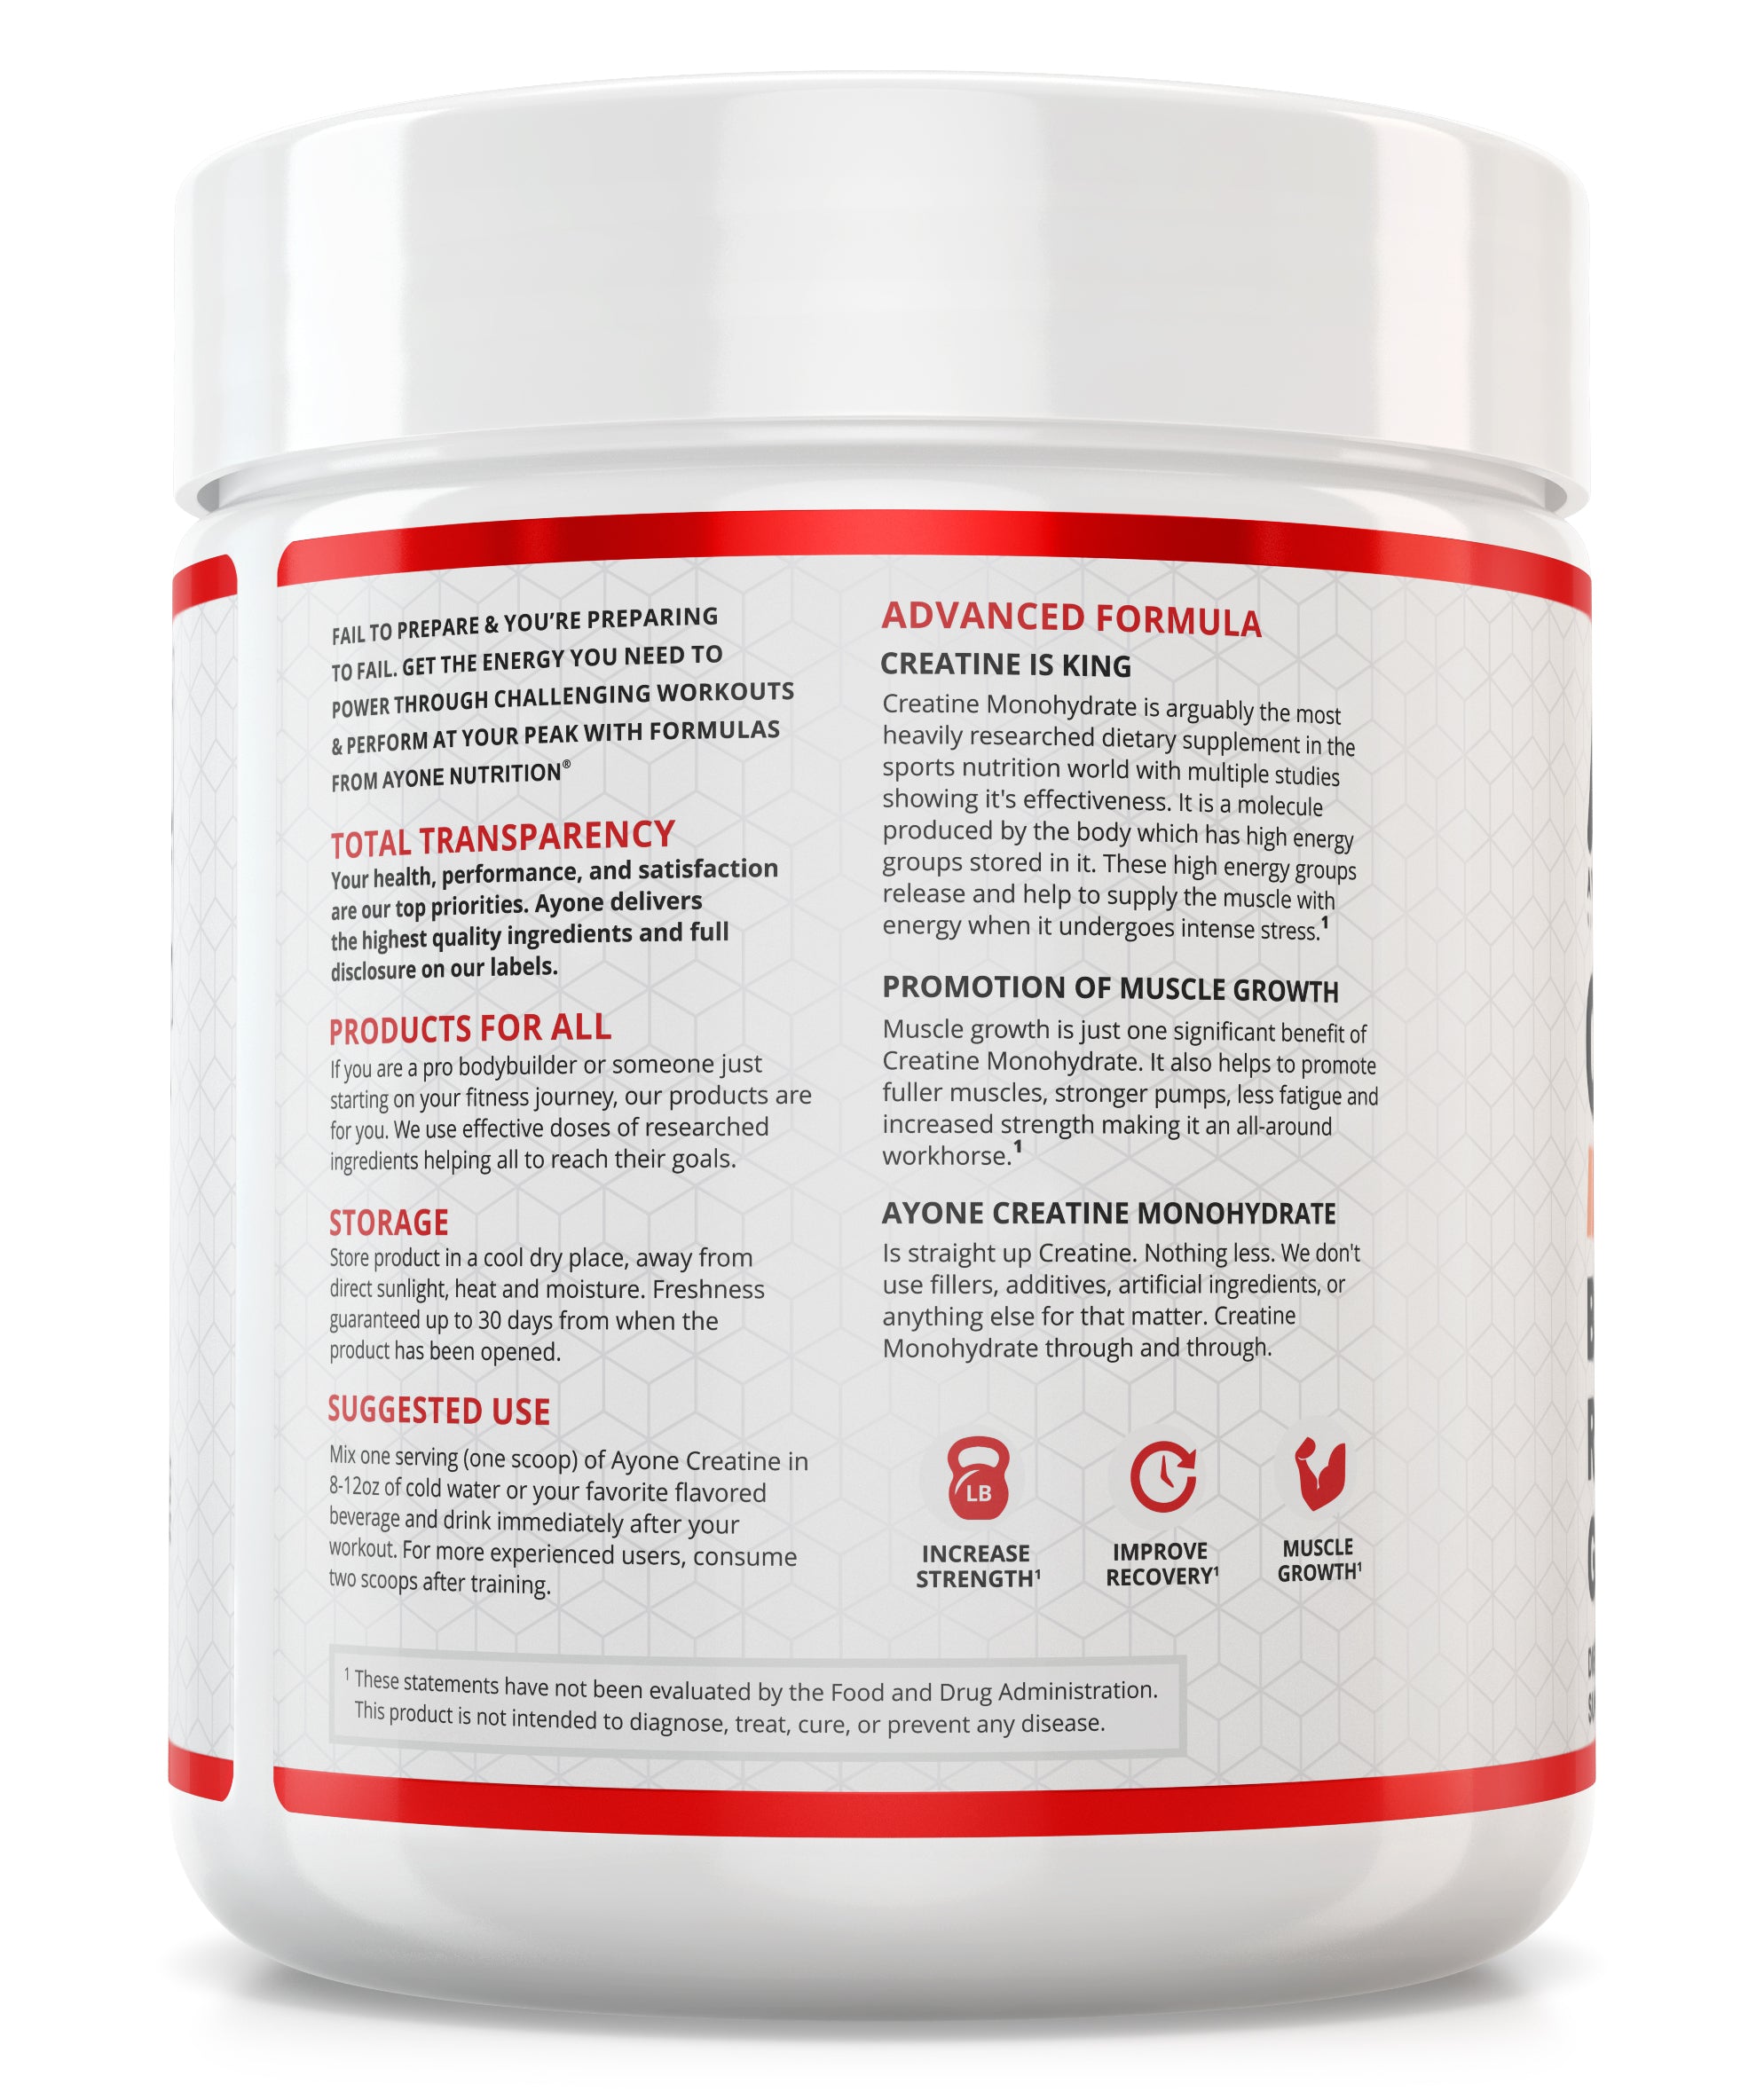 Ayone Nutrition Creatine - A1 Supplements Store